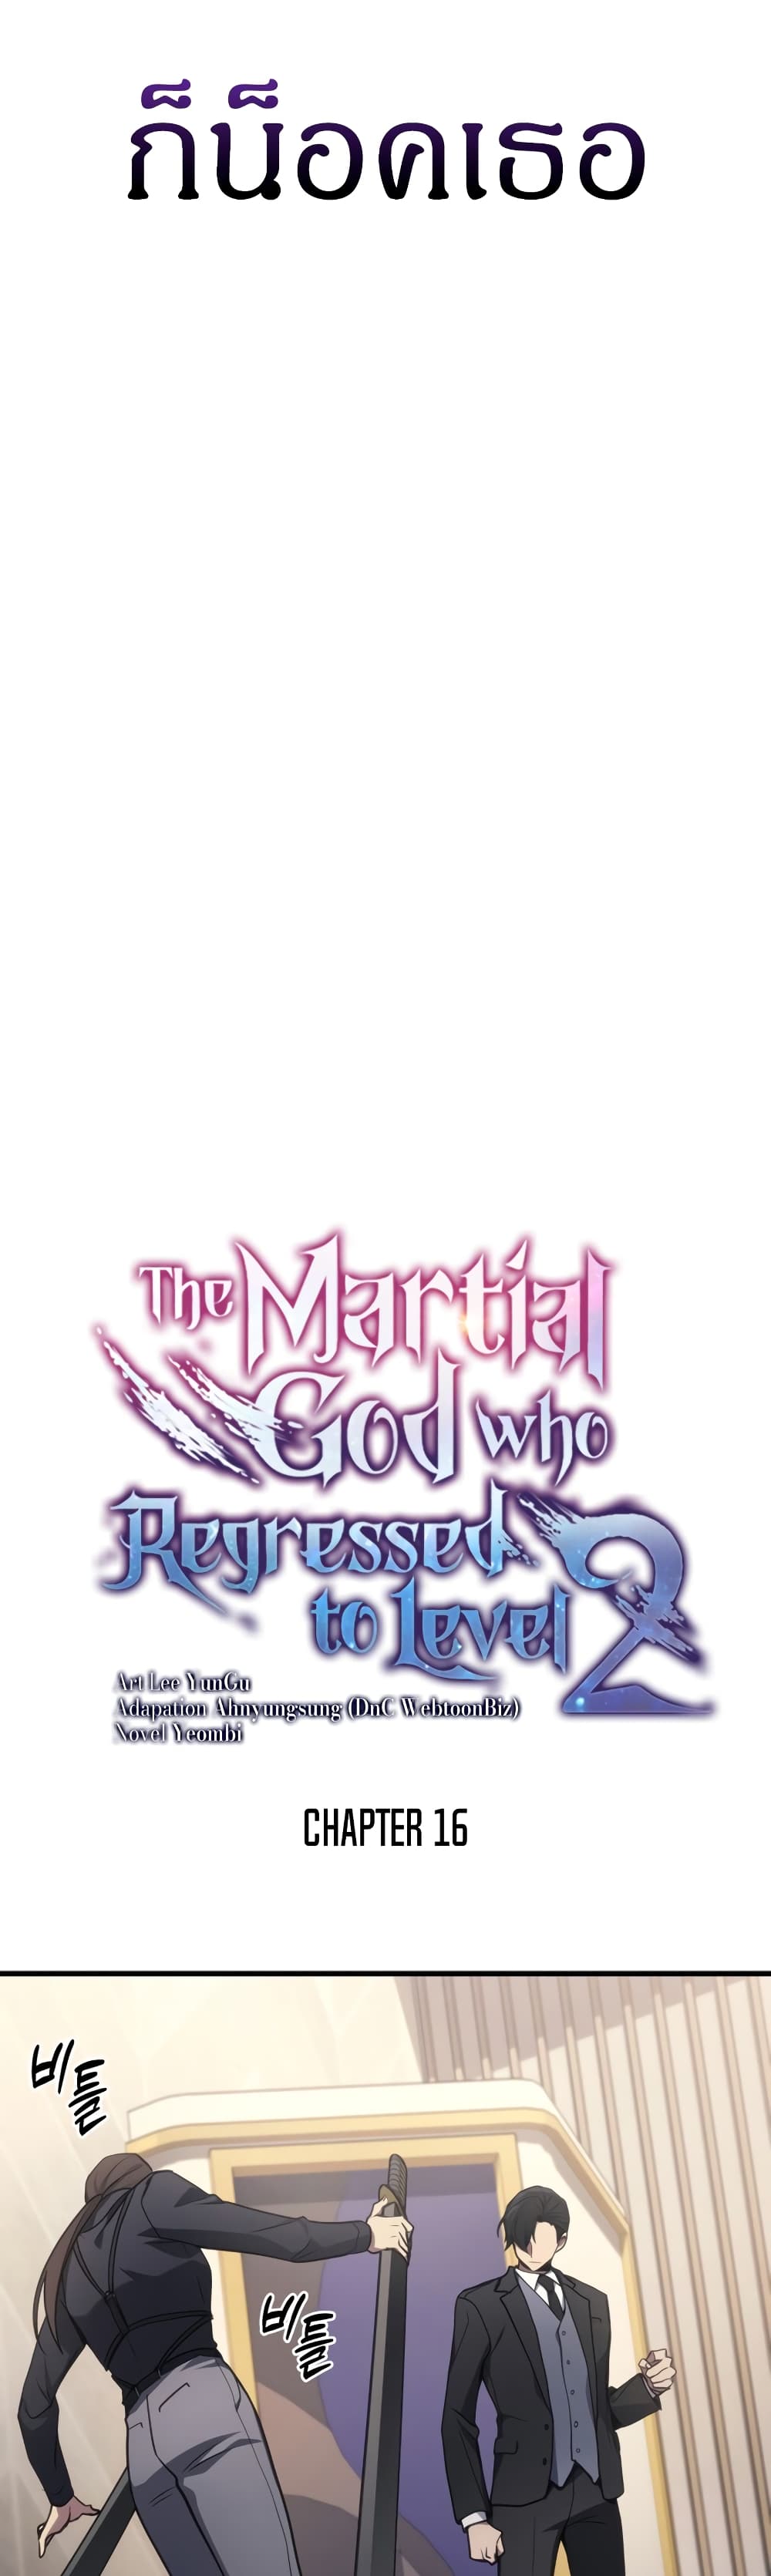 Martial God Regressed to Level 2 16-16